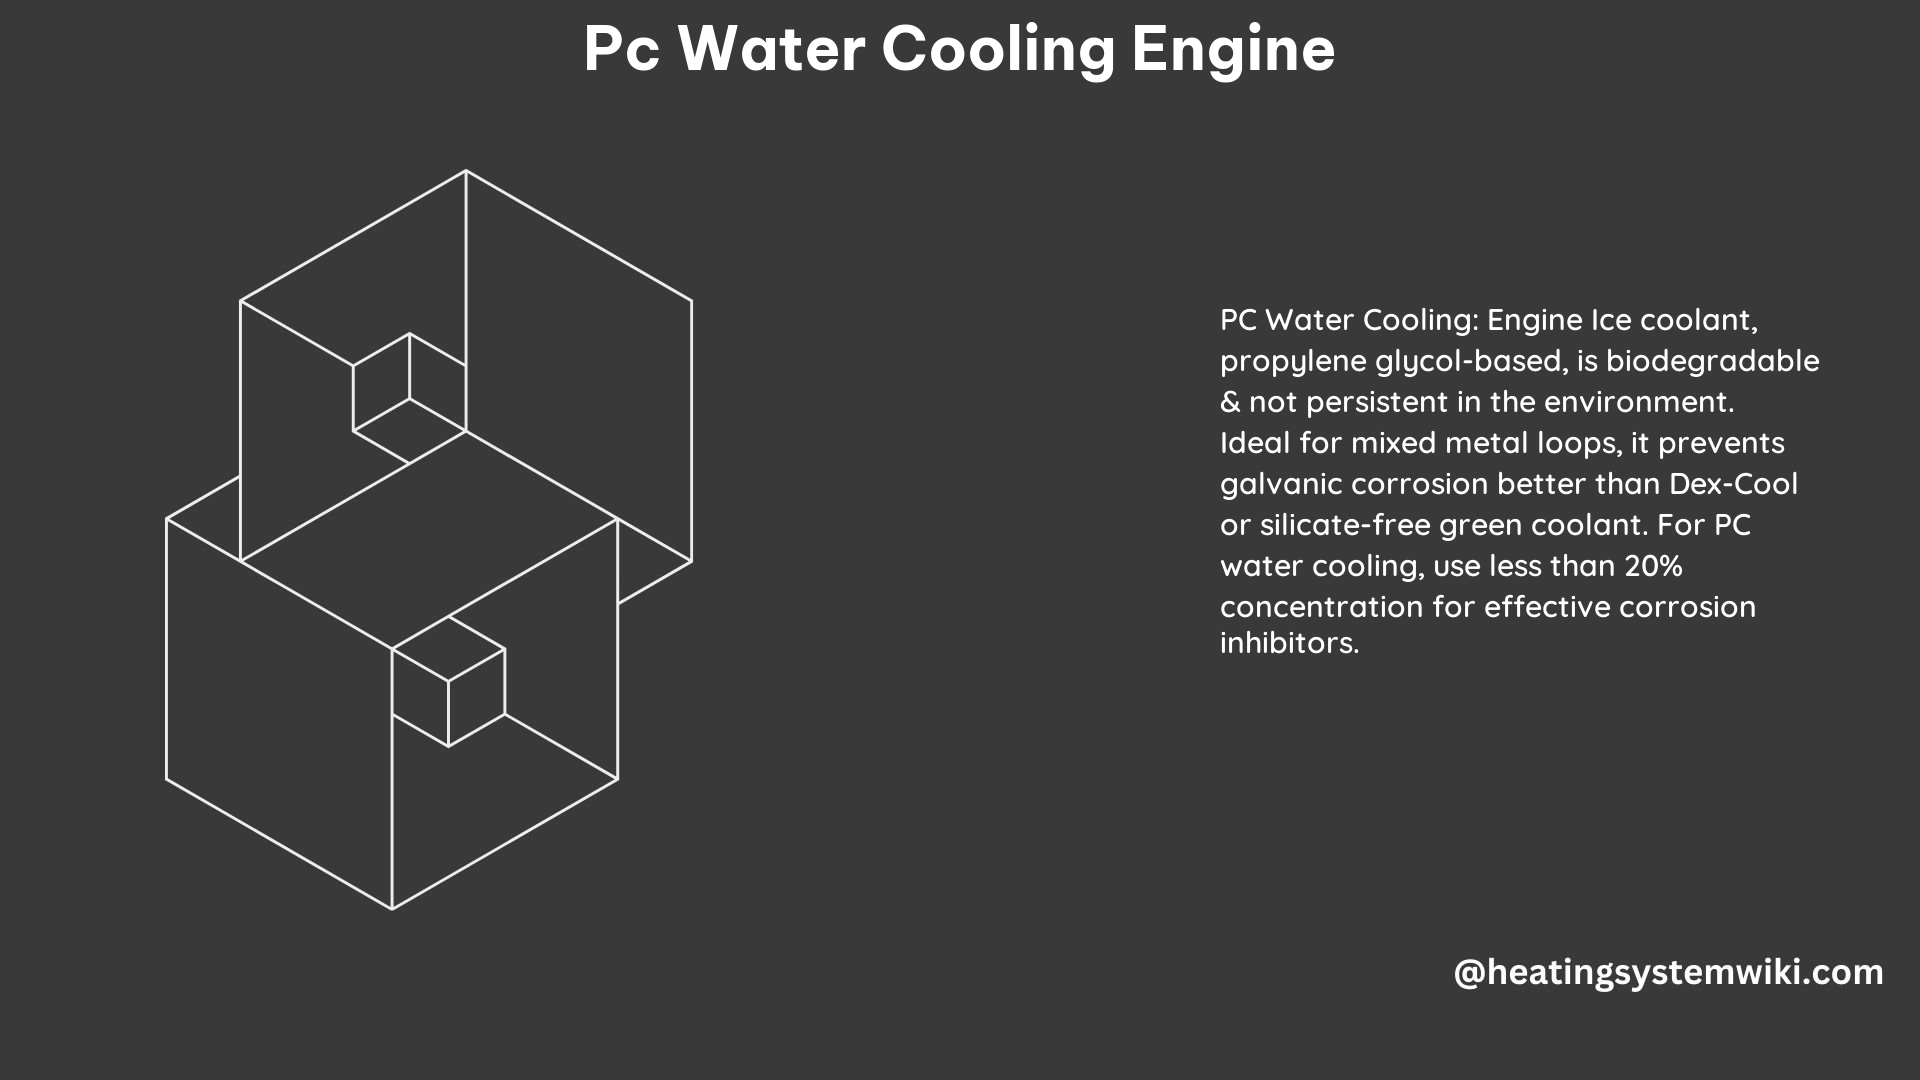 PC Water Cooling Engine